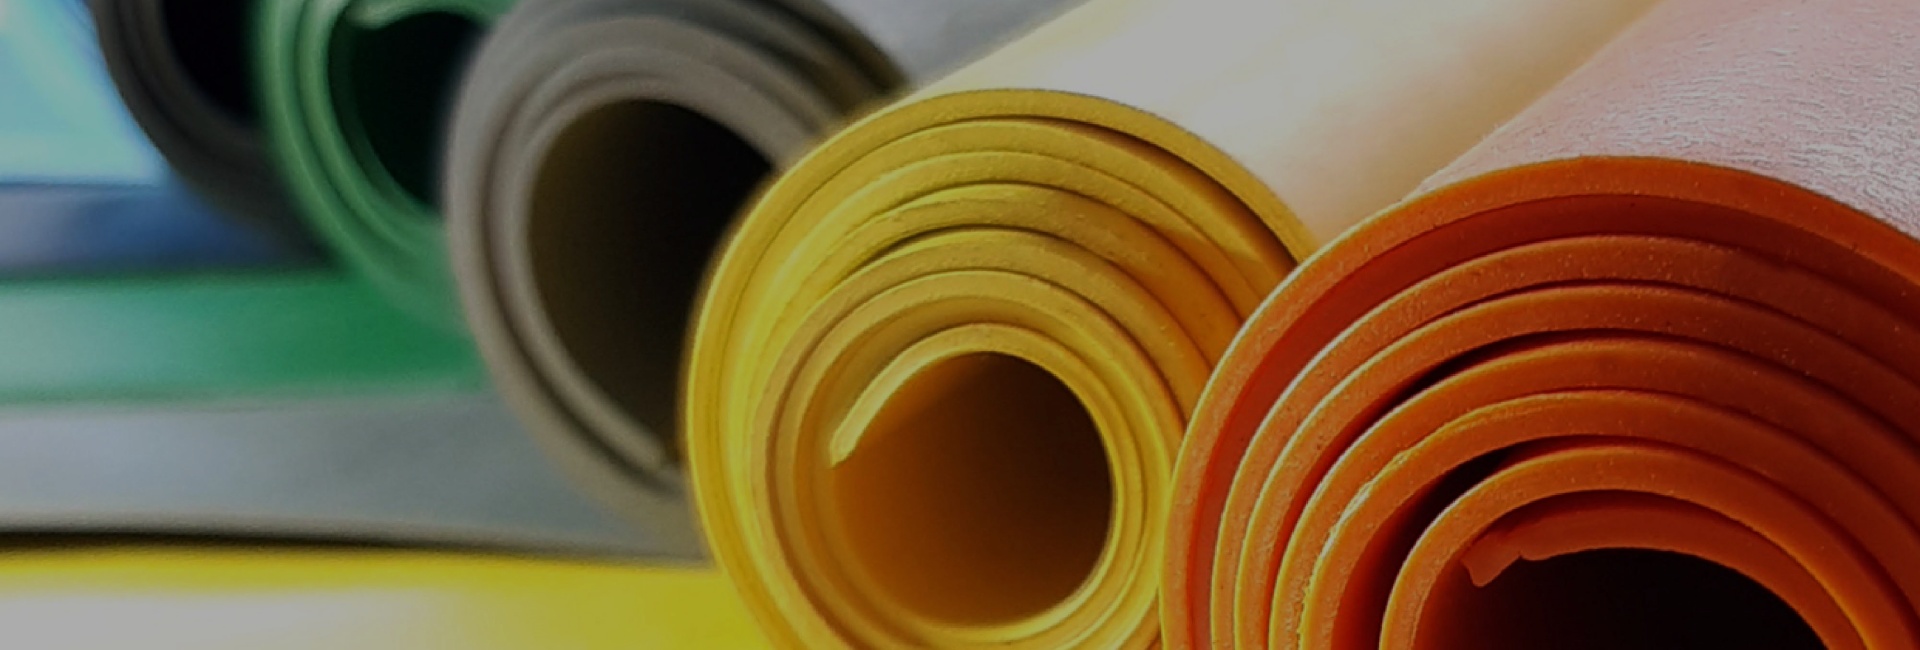 North West Rollers Ltd - Fibreglass Sleeves - Rubber Covered Rollers ...